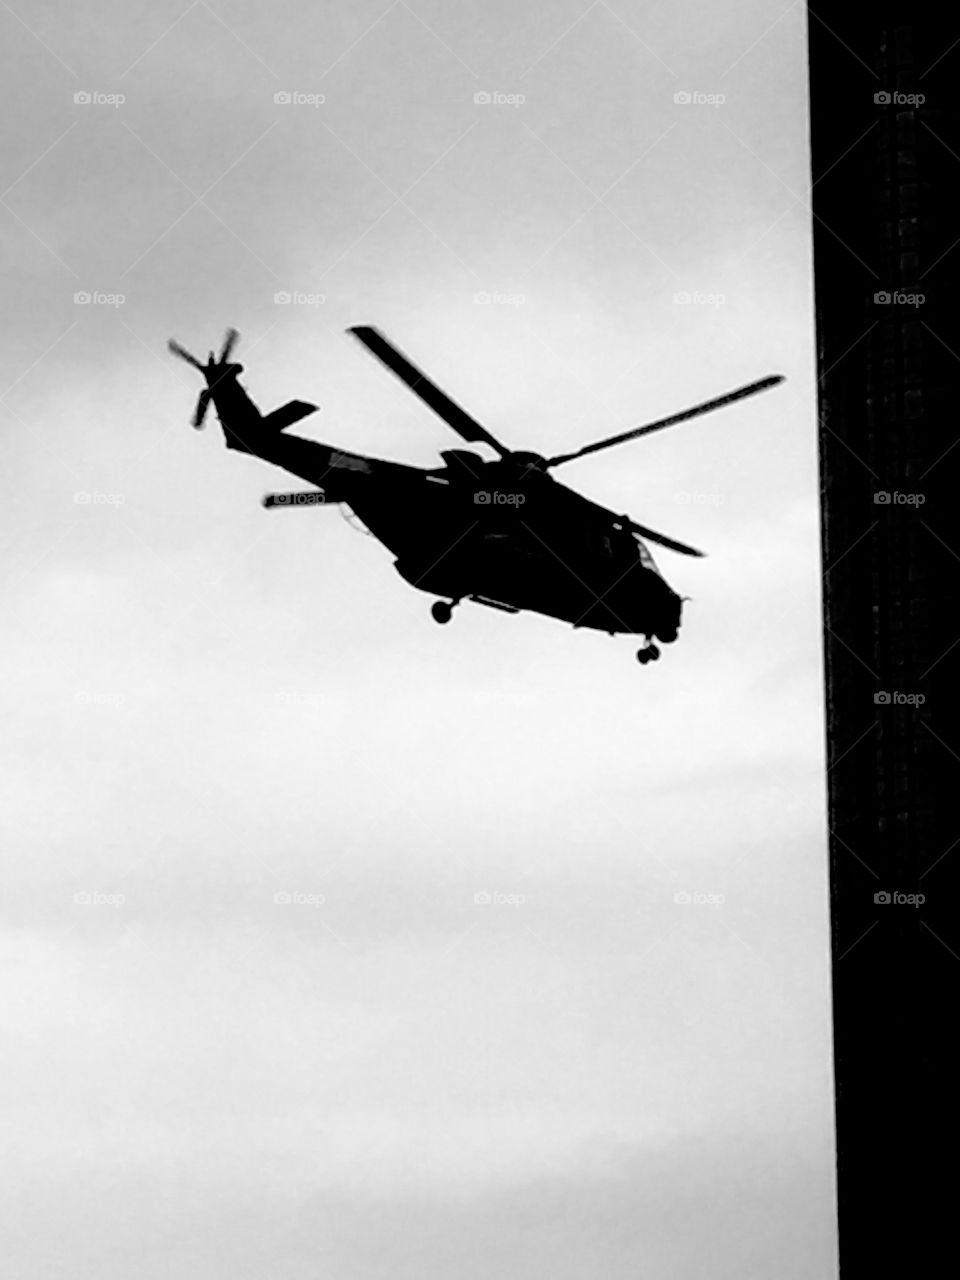 Helicopter coming into land silhouette 